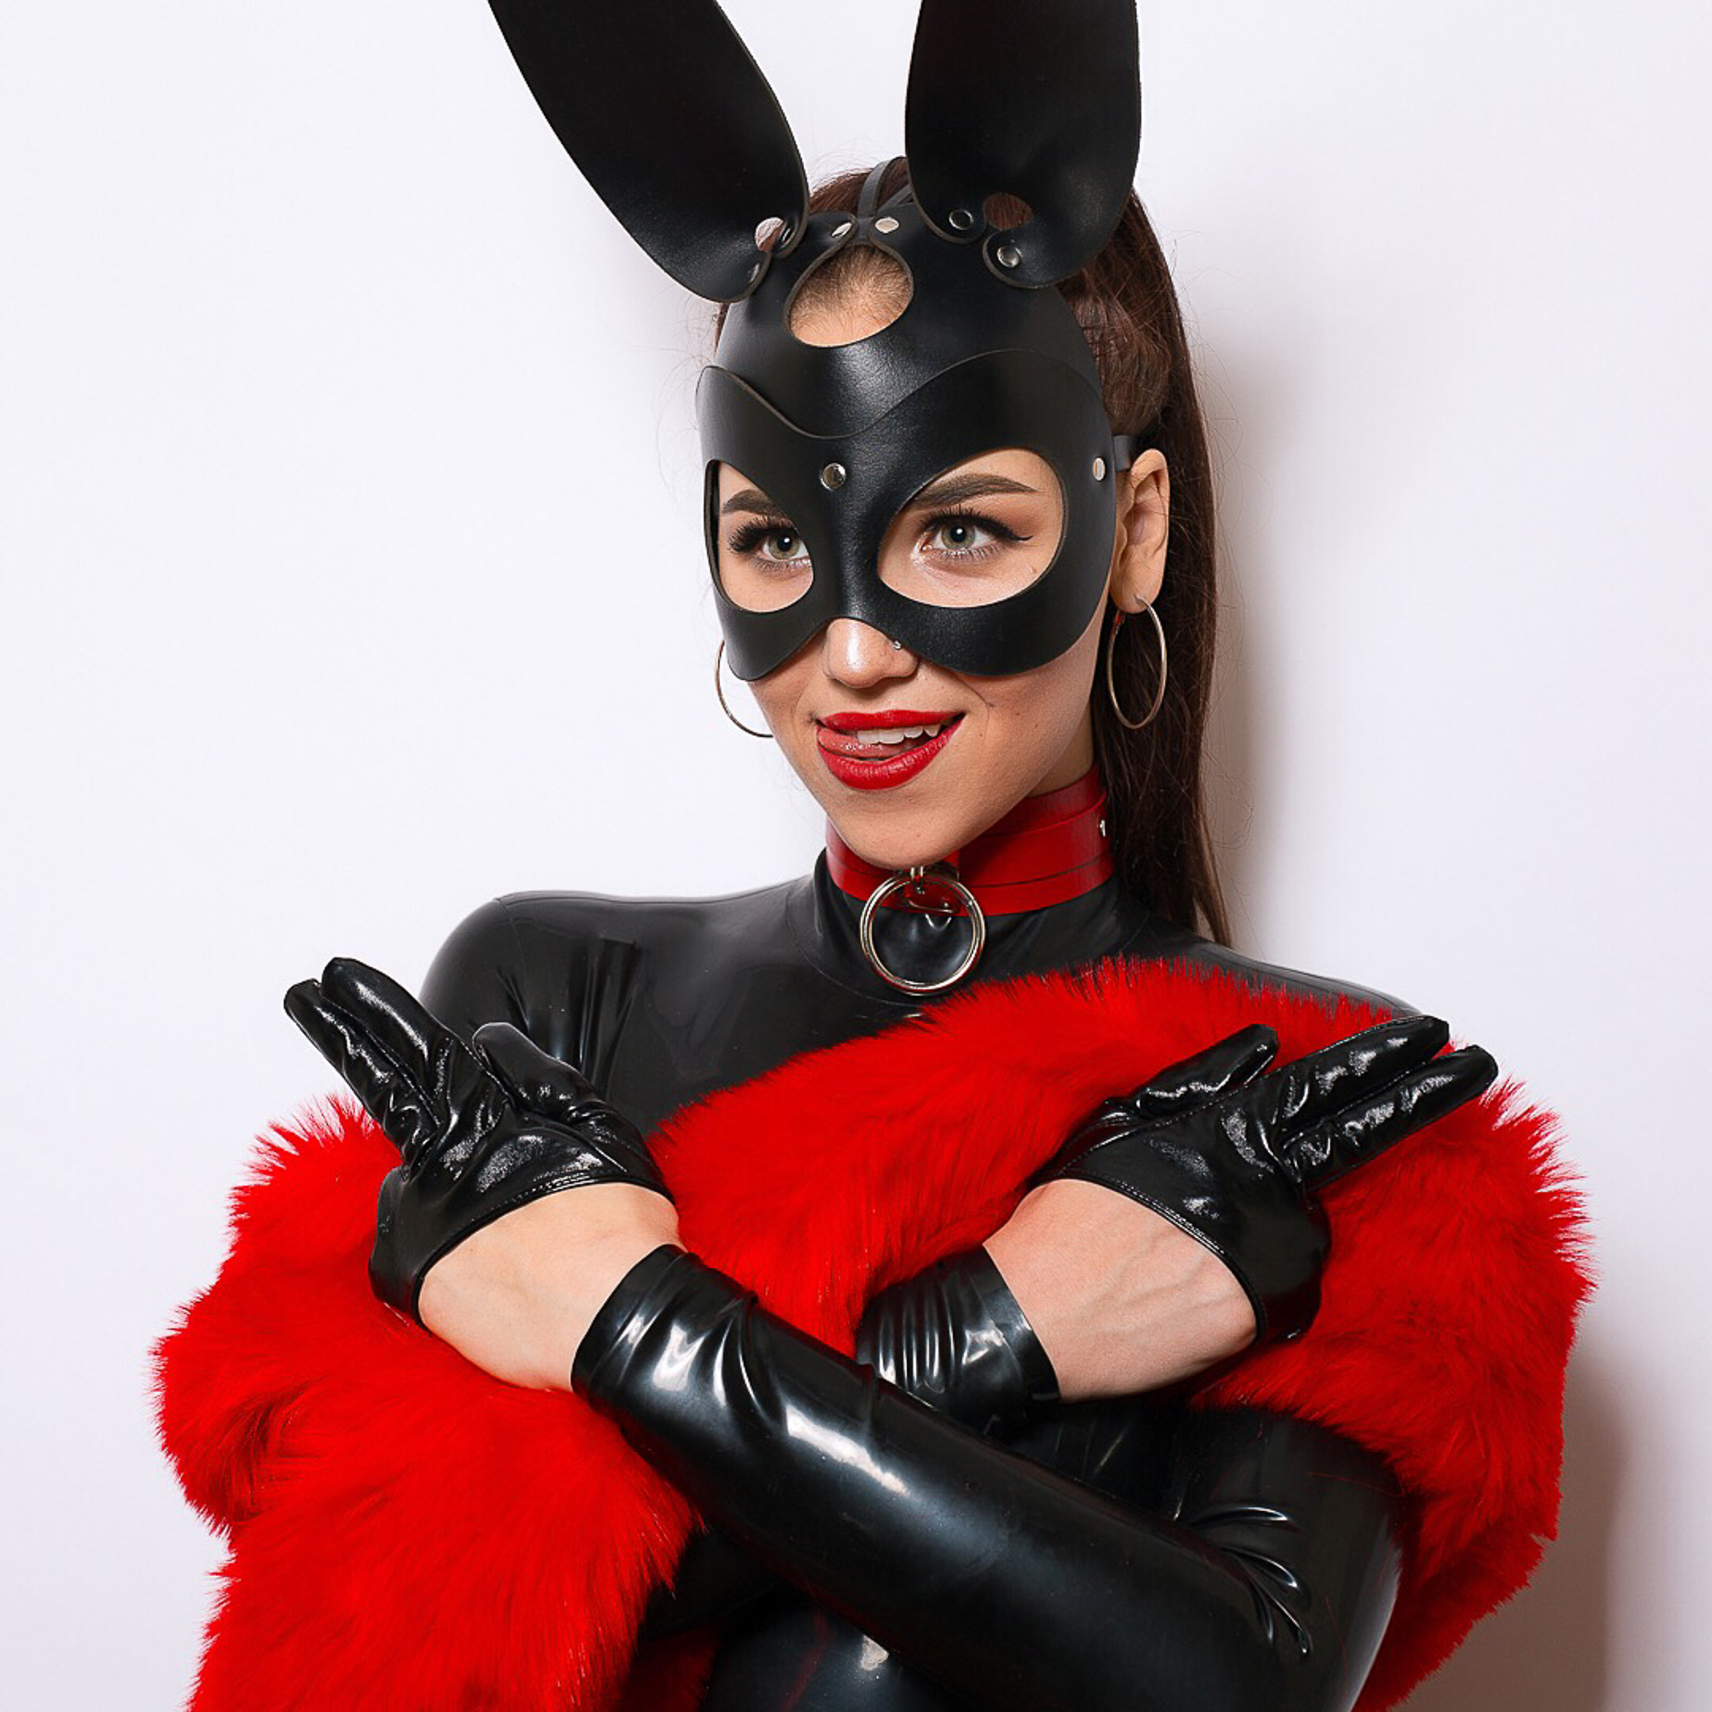 bunny mask Black made of genuine leather with slits for the eyes, an image for incognito in role-playing games and fetish parties